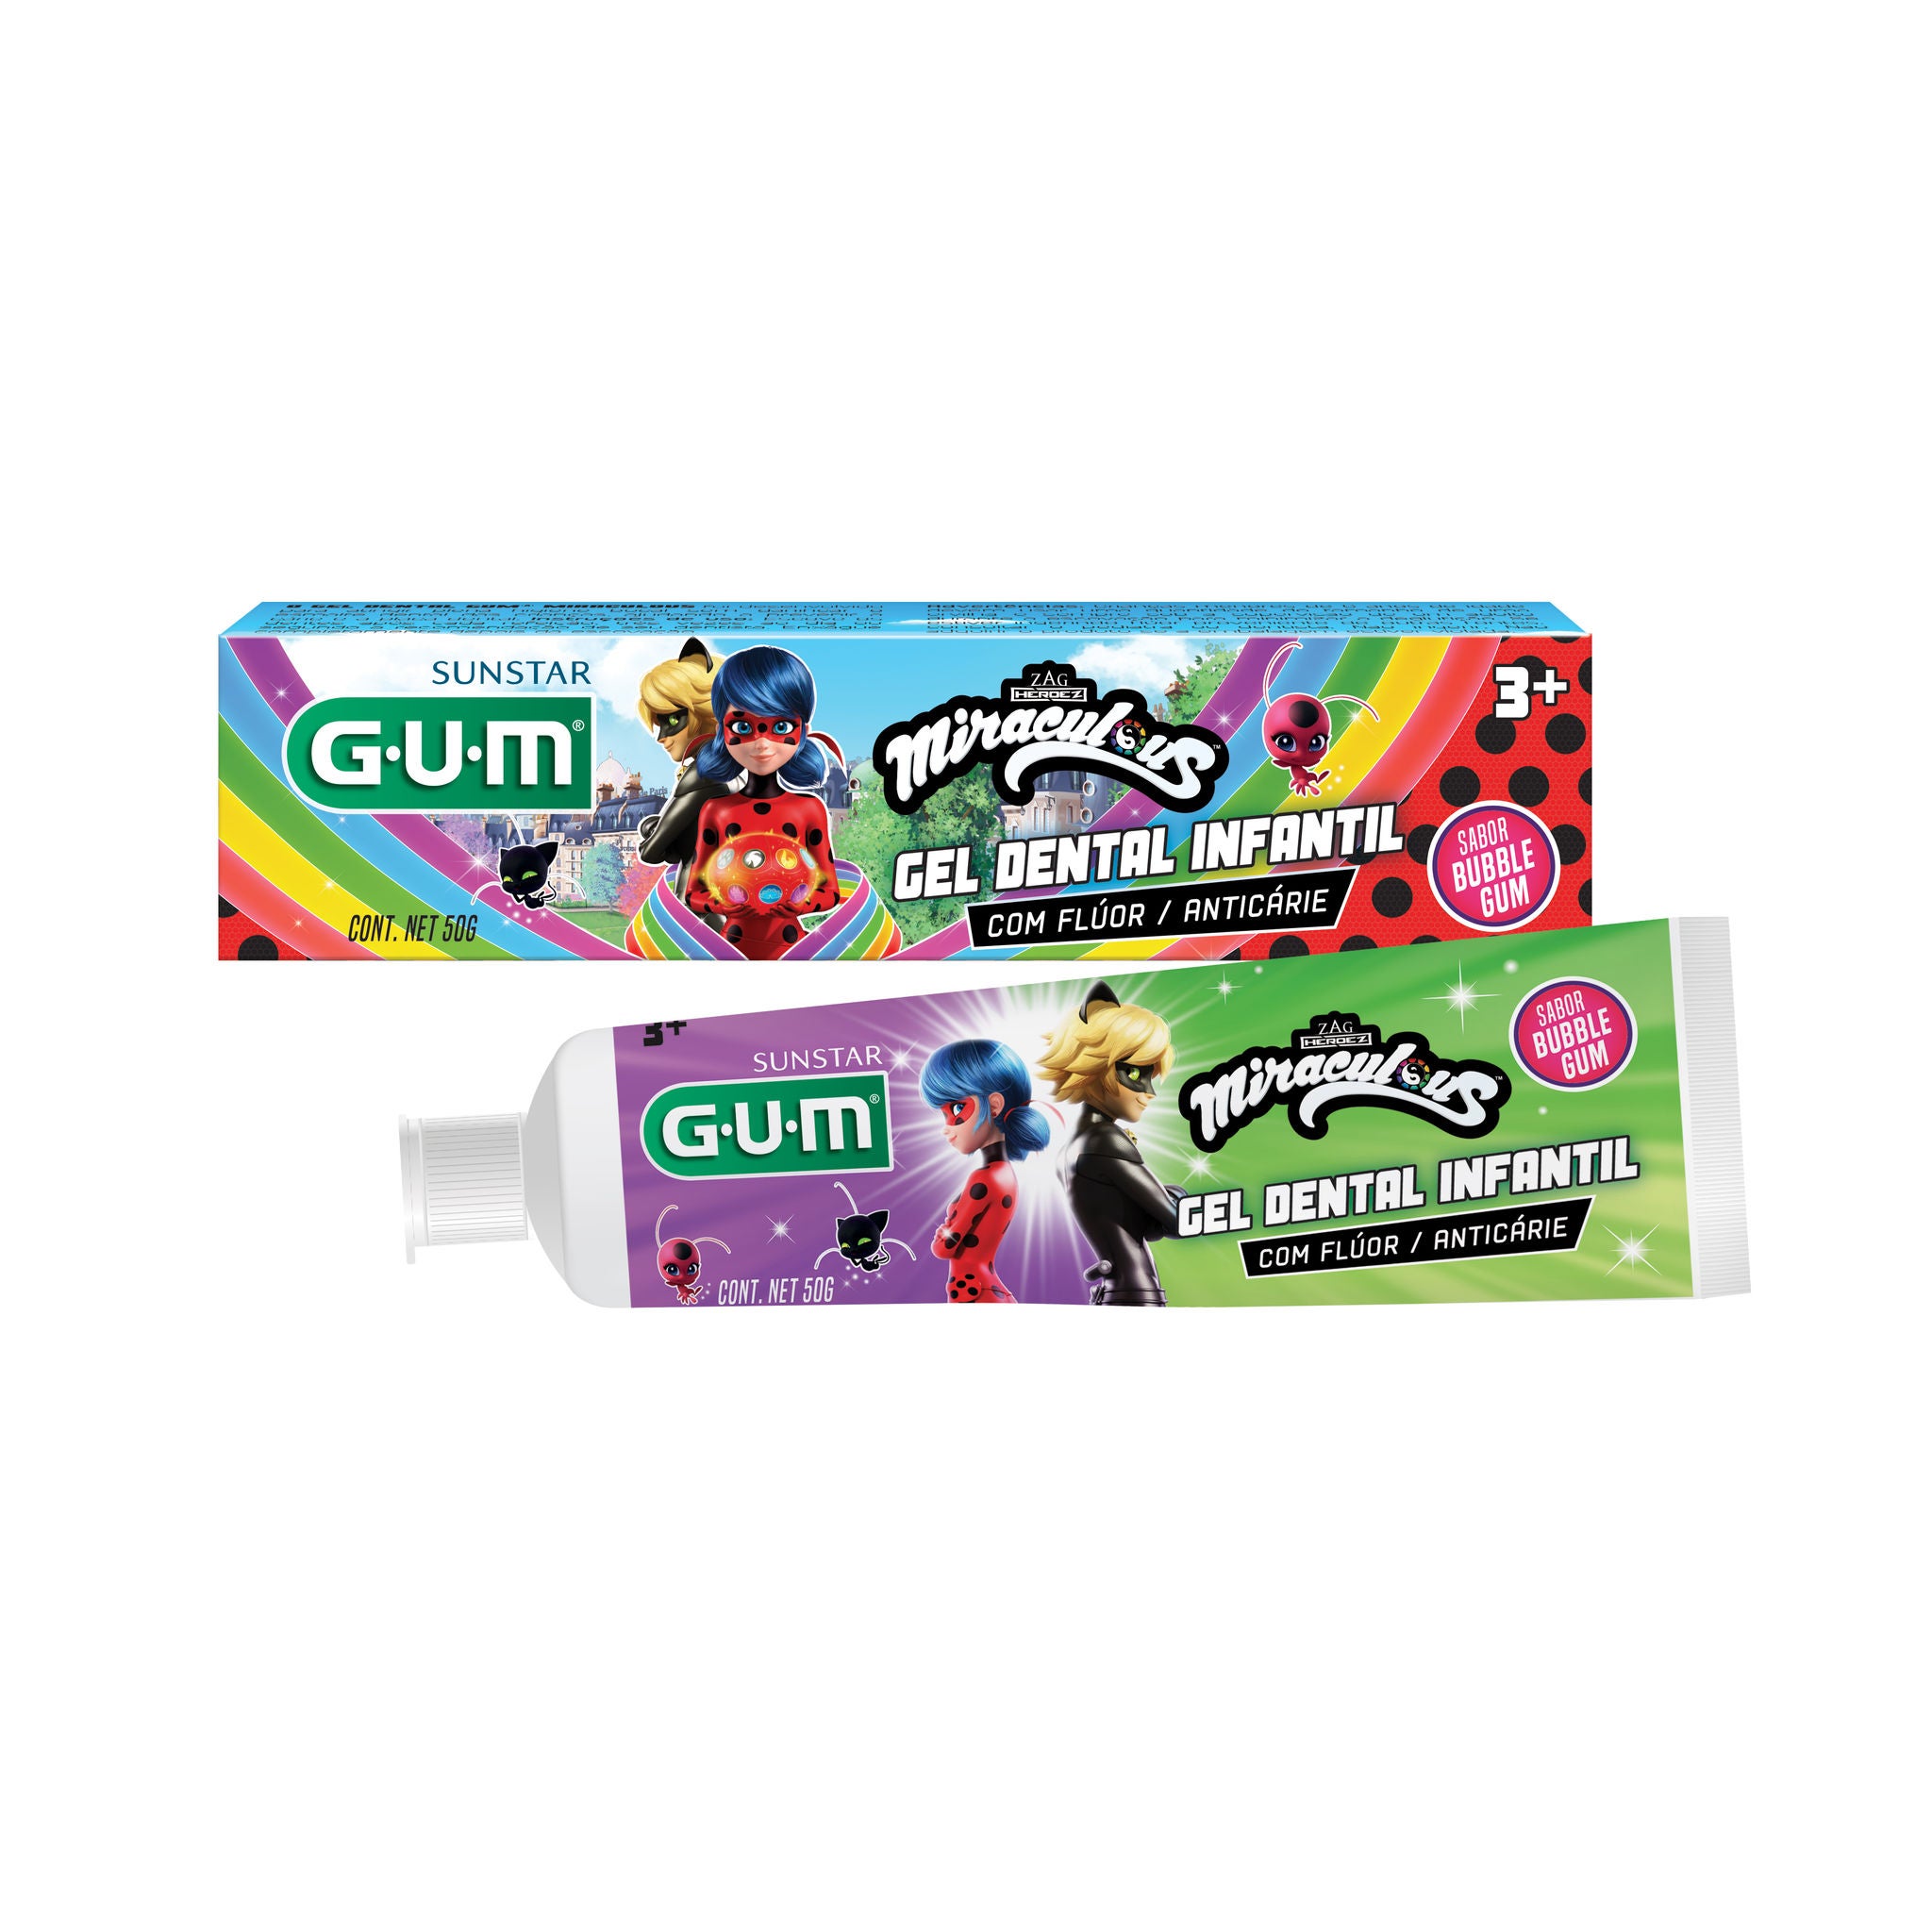 1321BUG-Product-Packaging-Toothpaste-Ladybug-front-50g.jpg